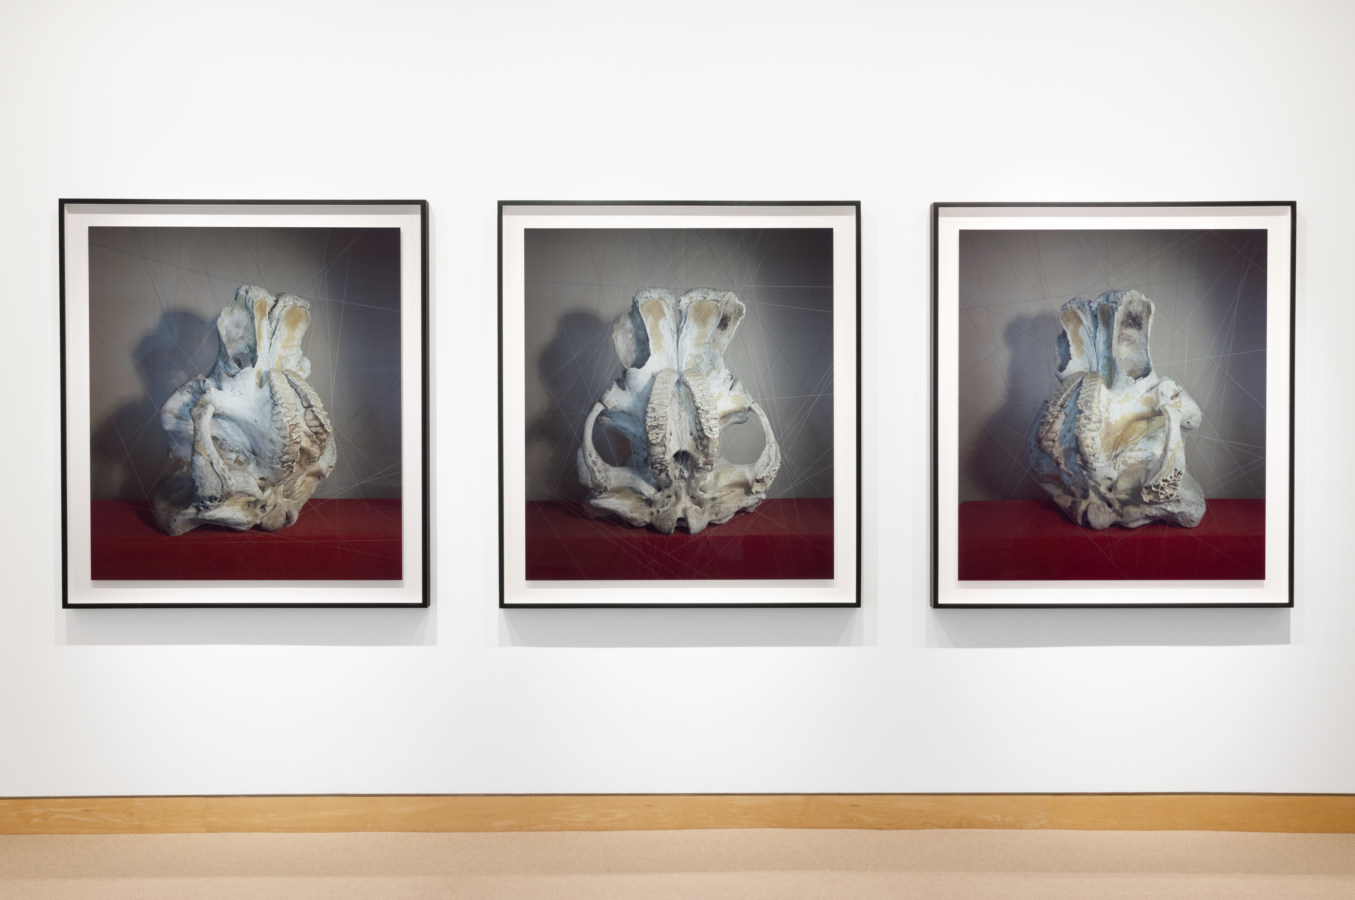 Color image of framed triptych depicting an elephant skull on a red plinth surrounded by suspended threads framed in black on white gallery wall